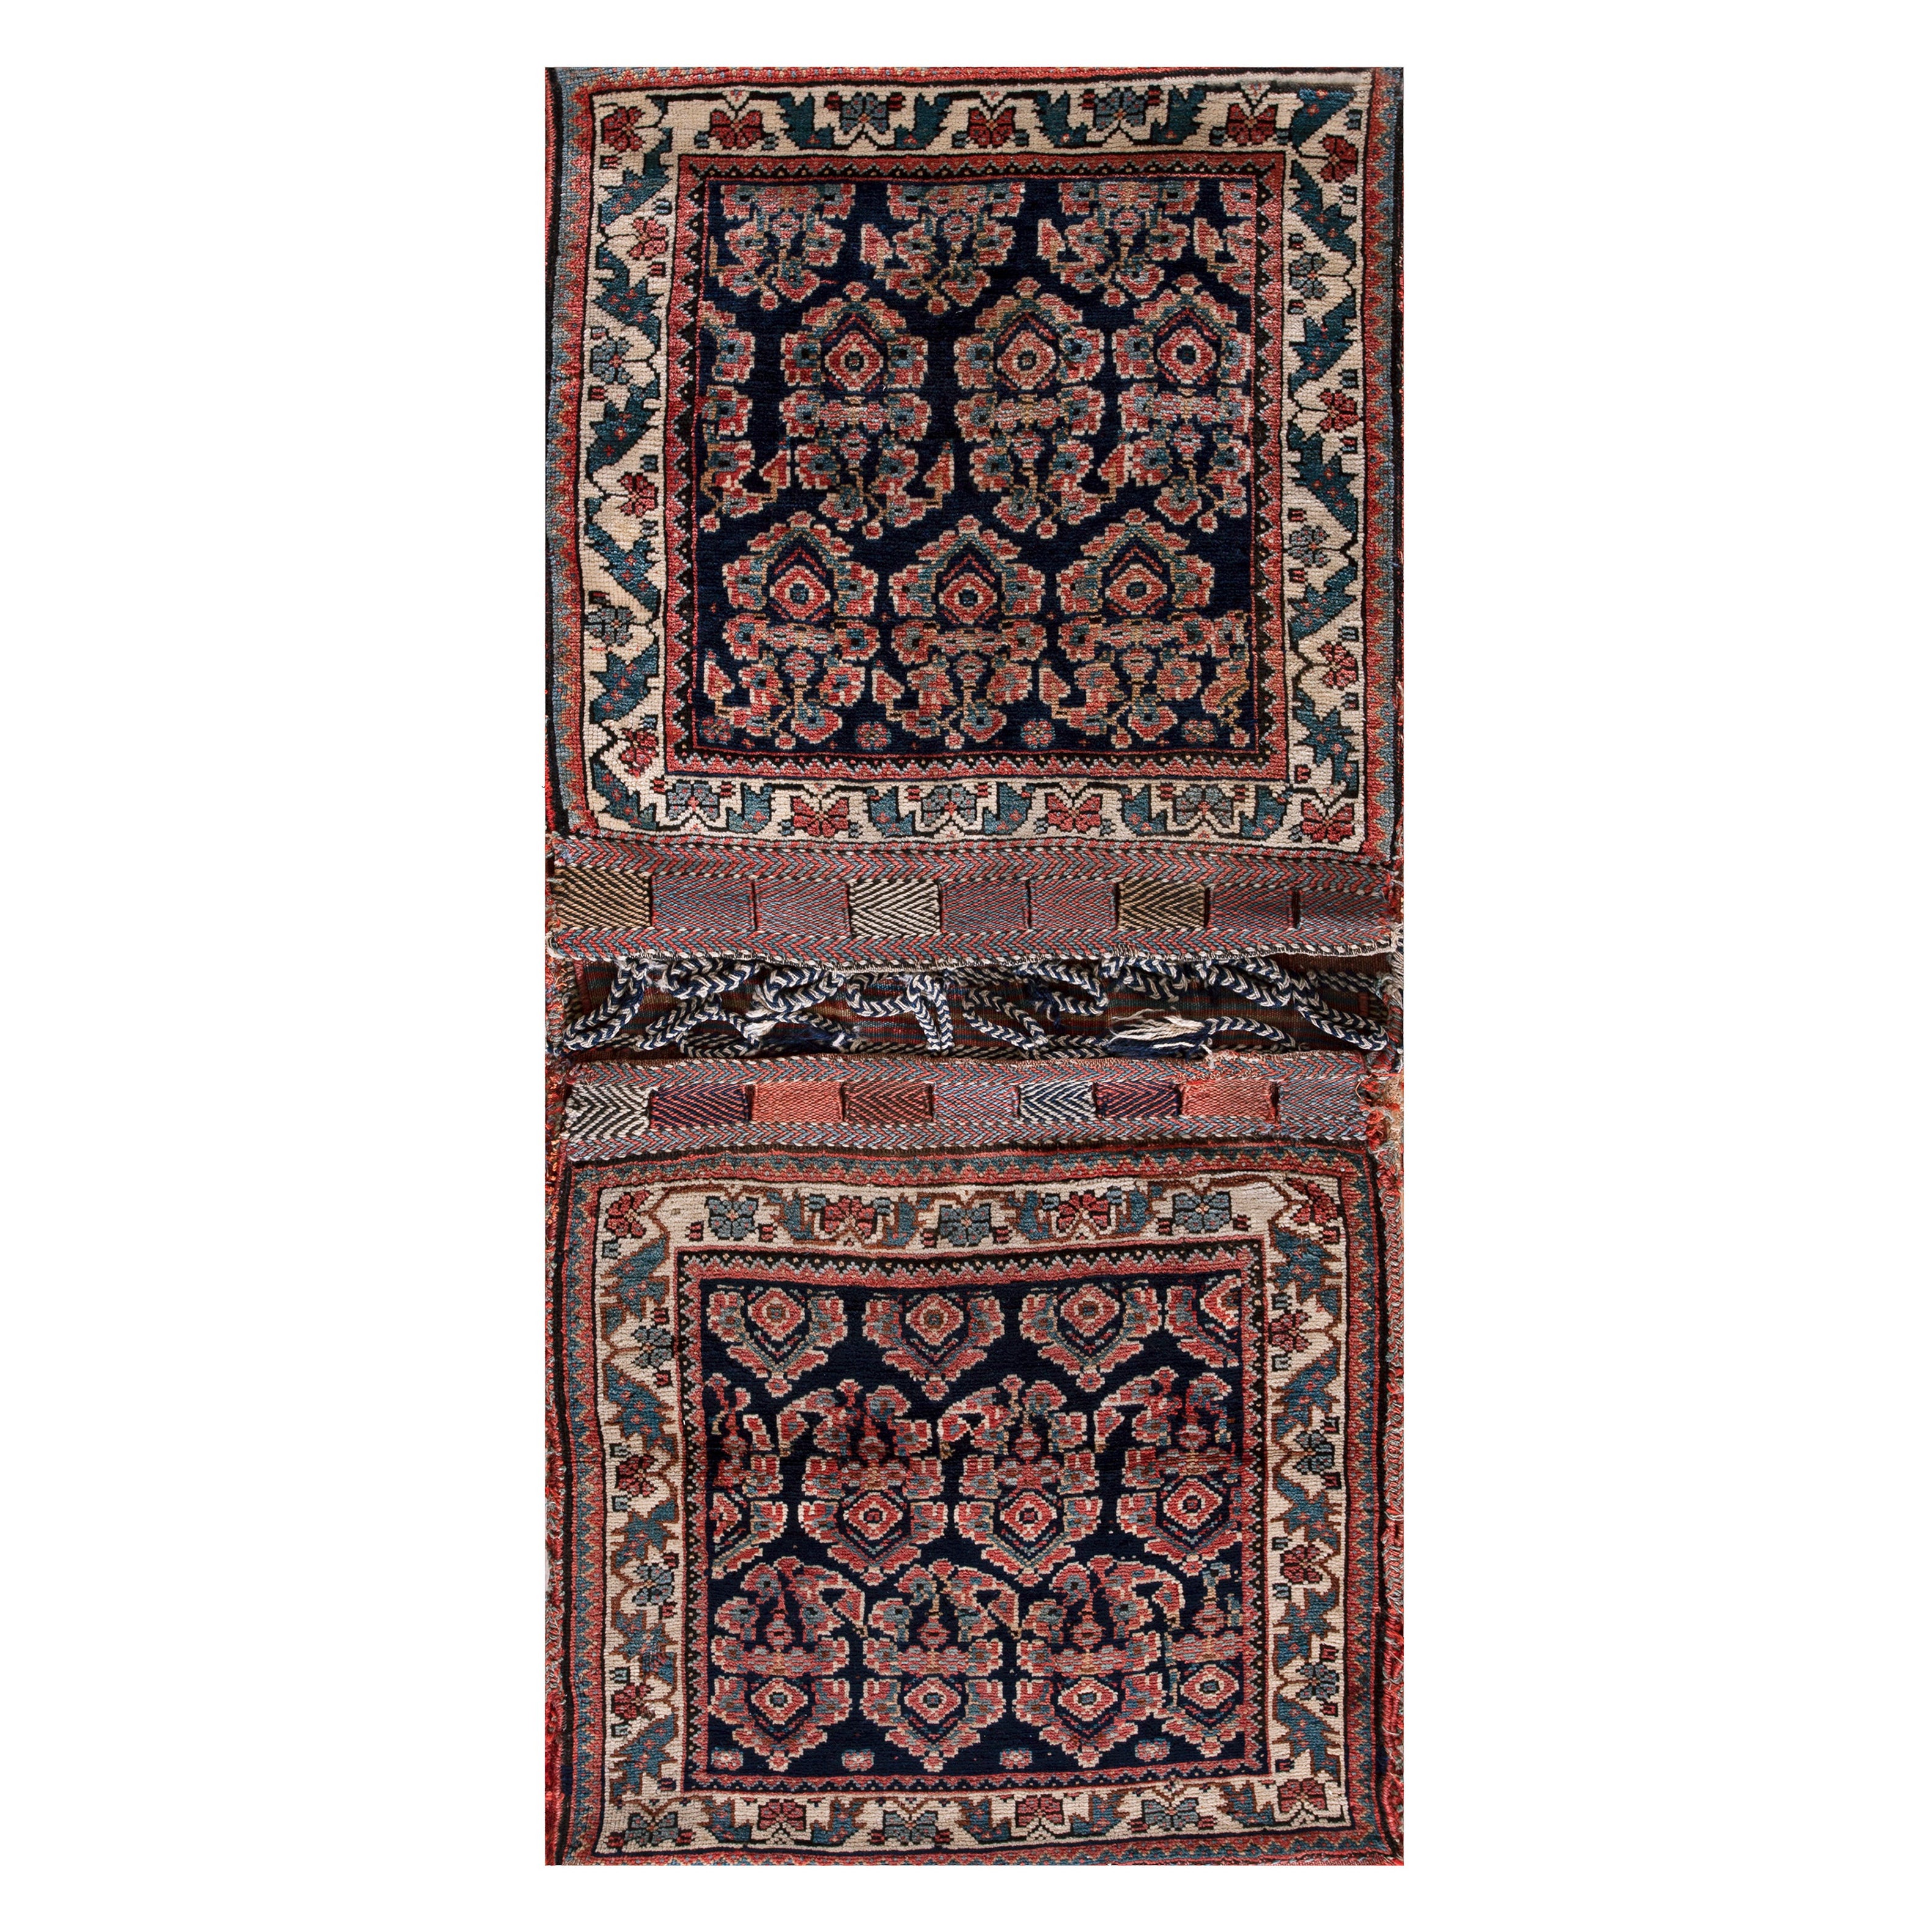 Late 19th Century S. Persian Afshar Saddle Bag Carpet ( 2' x 4'2" - 61 x 127 ) For Sale